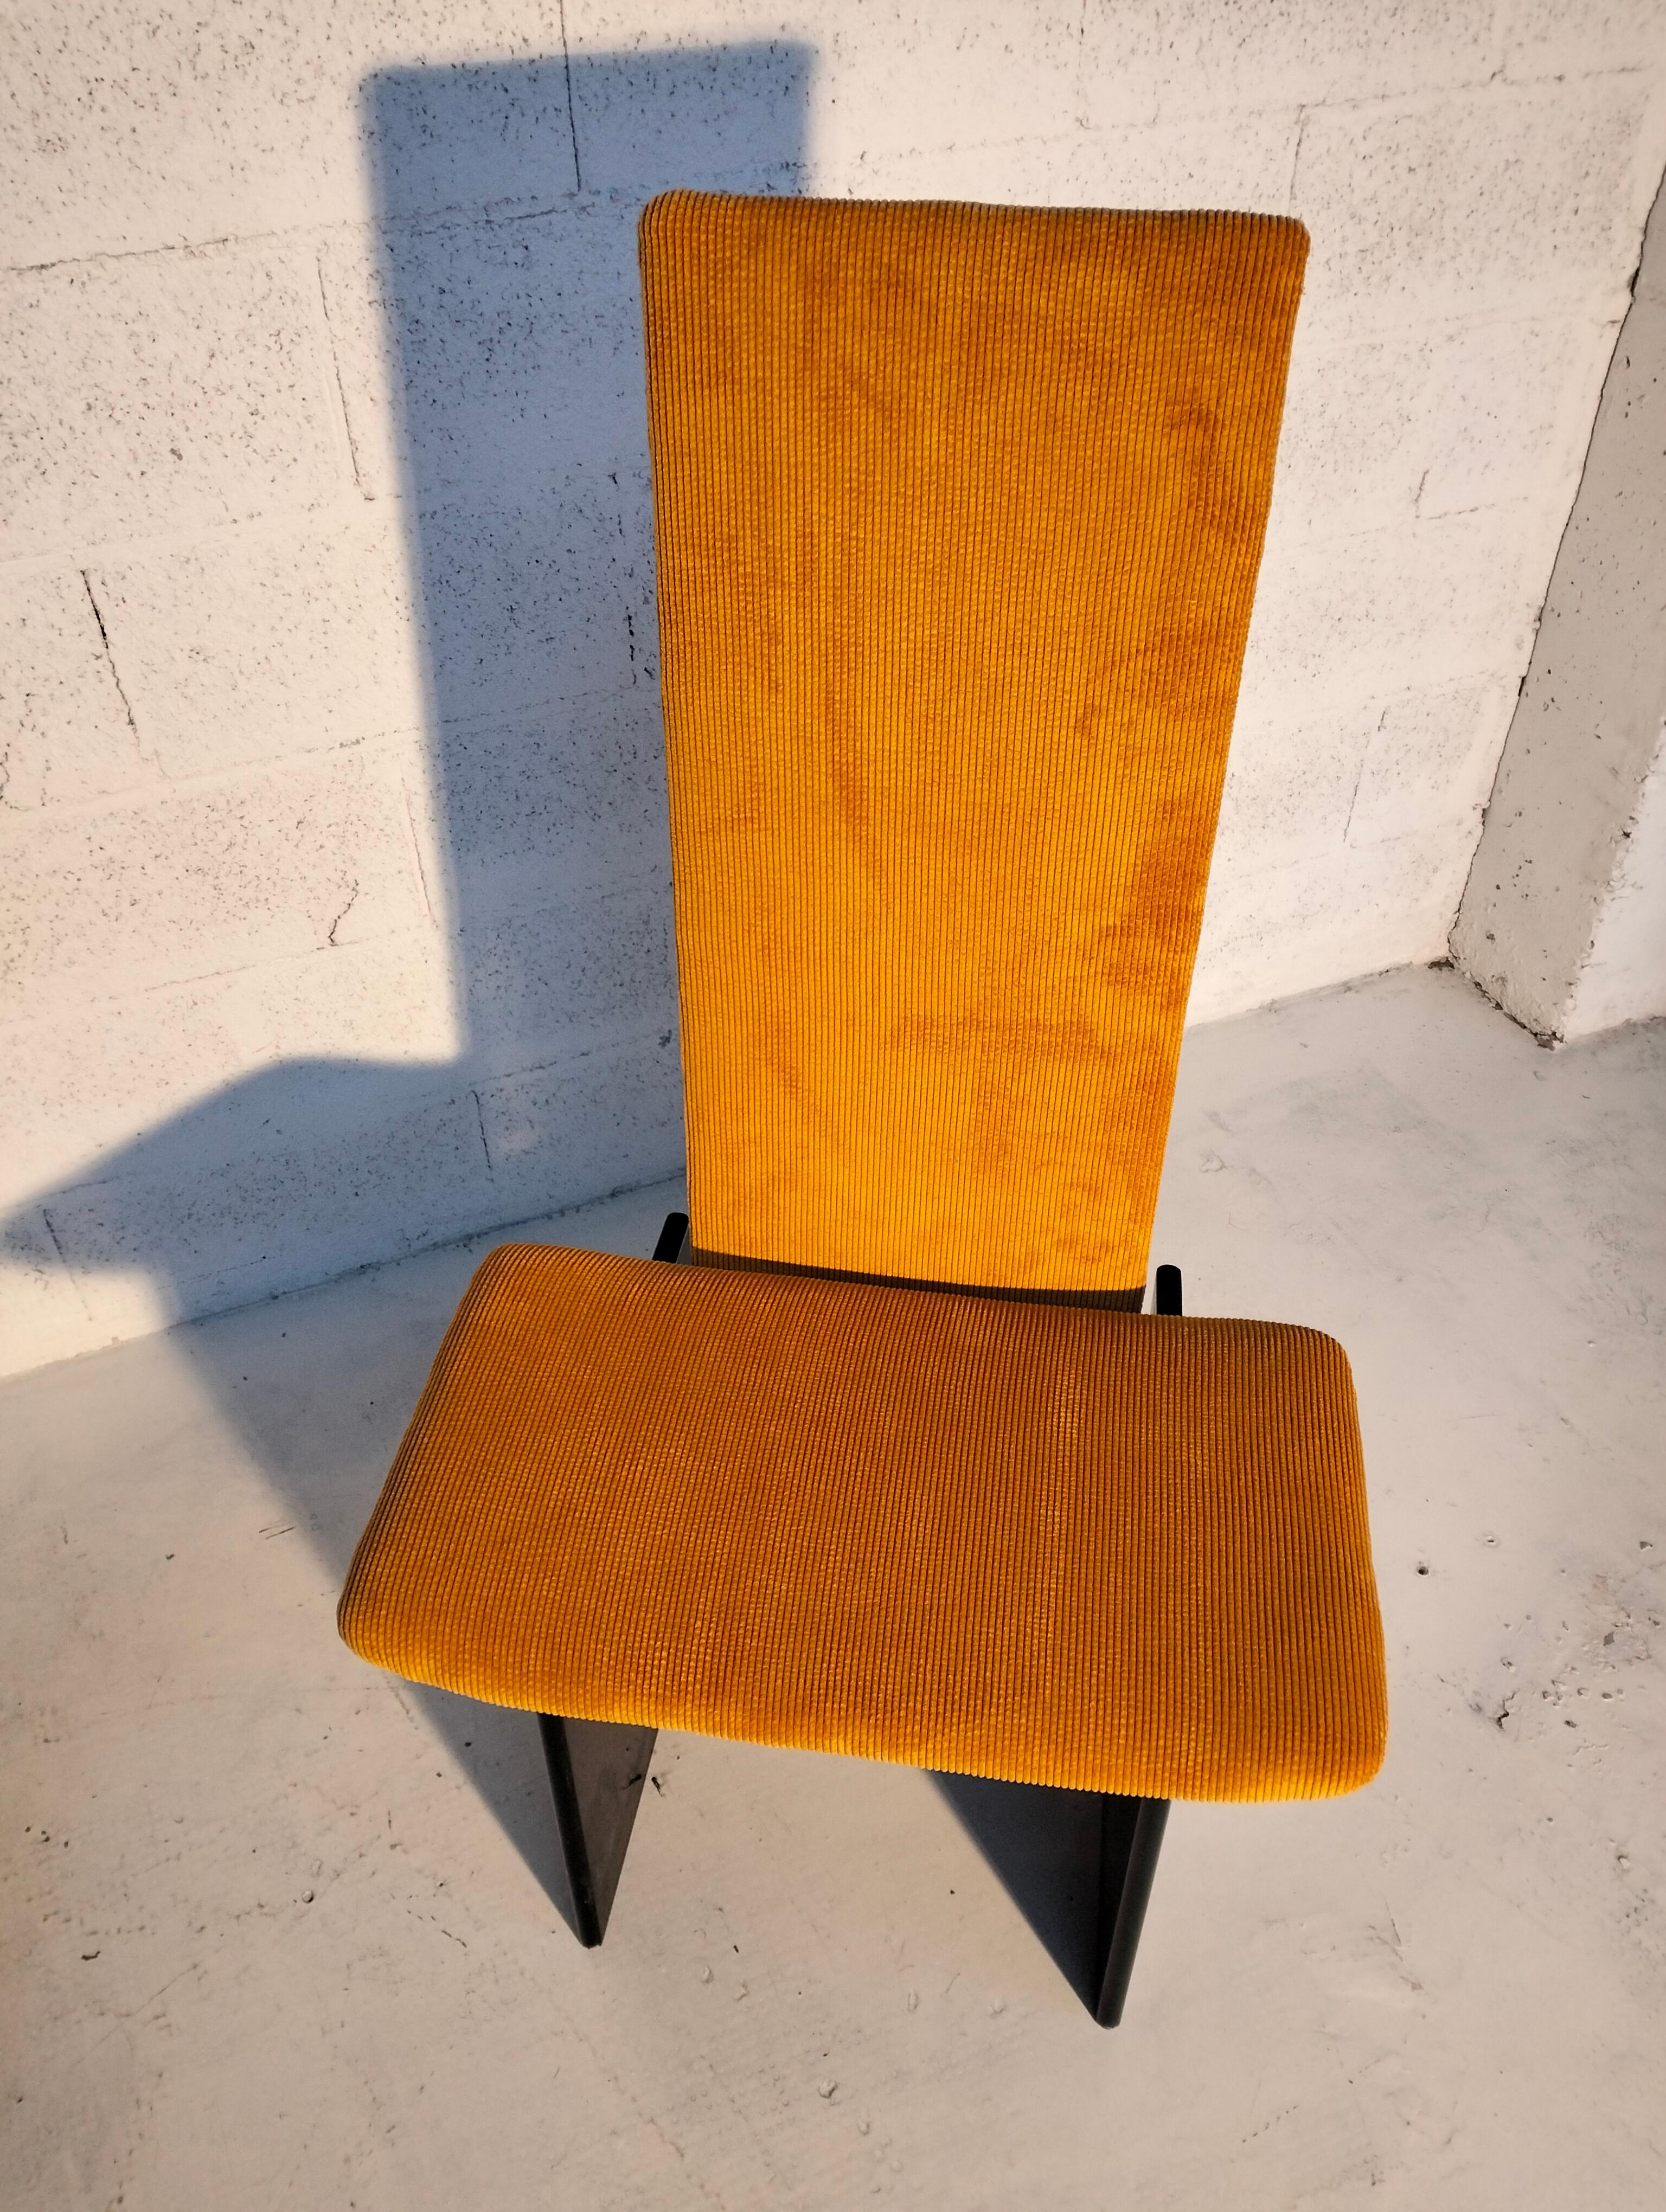 Late 20th Century Set of 2 ocra yellow chairs Rennie mod. by K. Takahama for S. Gavina 70's, Italy